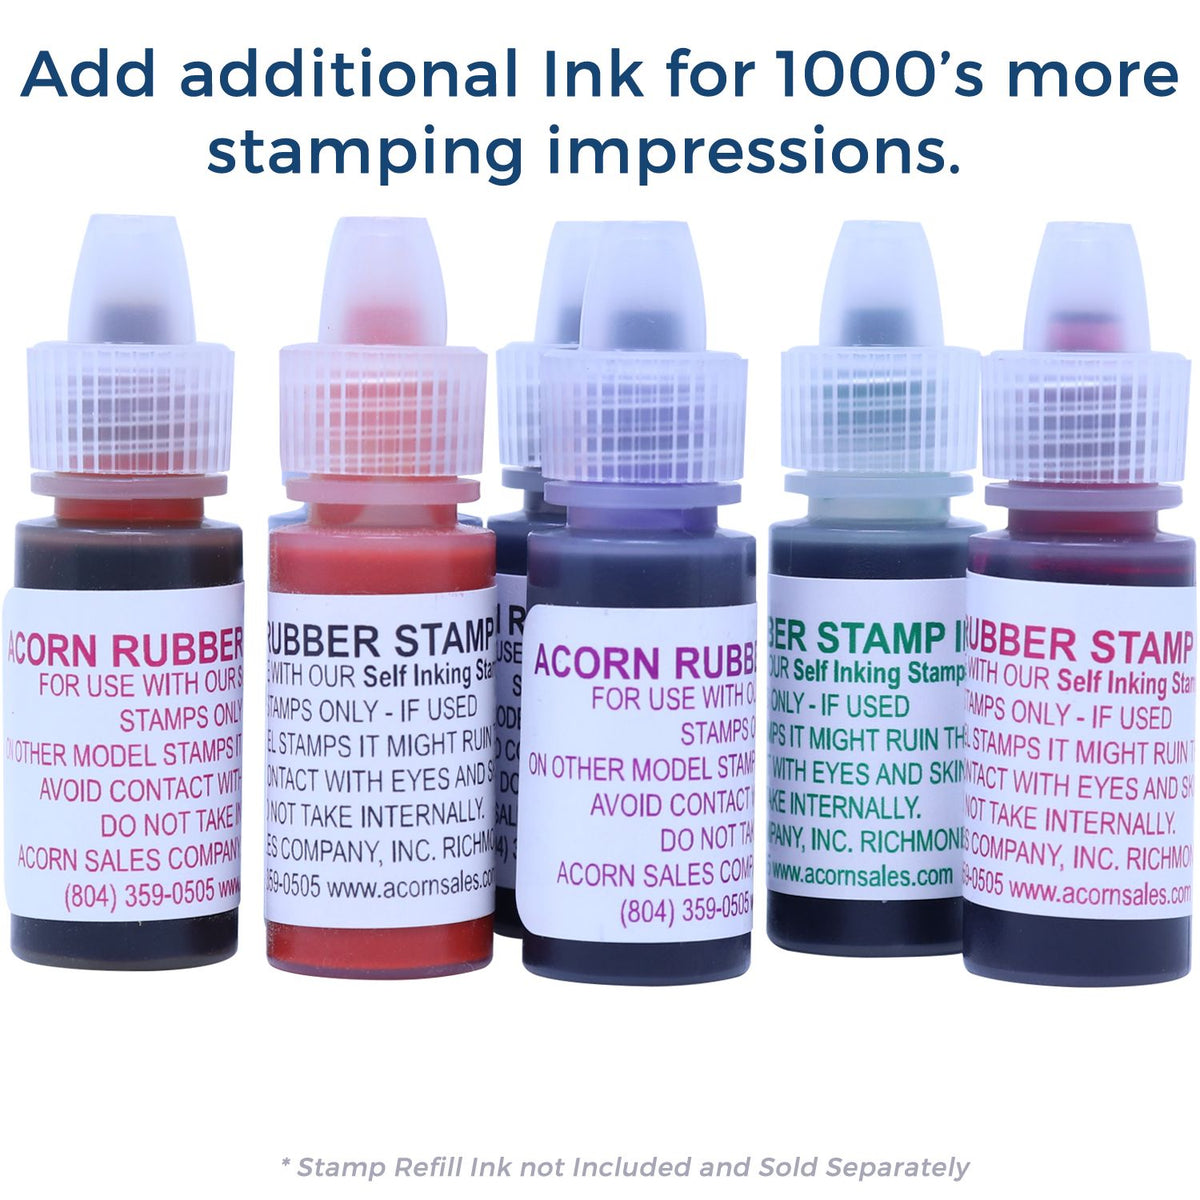 Refill Ink for Self-Inking Round Happy Smiley Stamp Available